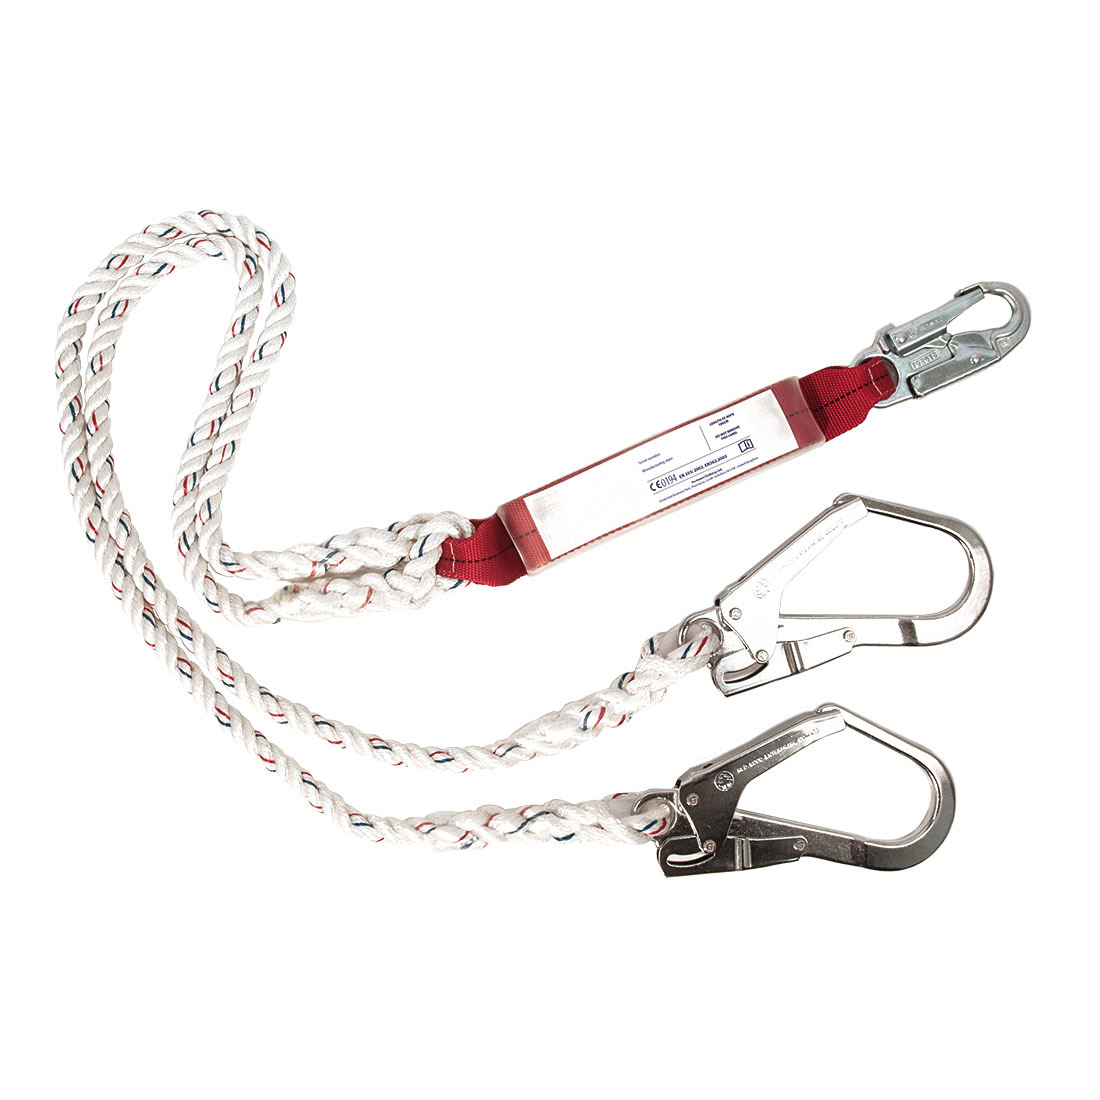 Double Lanyard With Shock Absorber